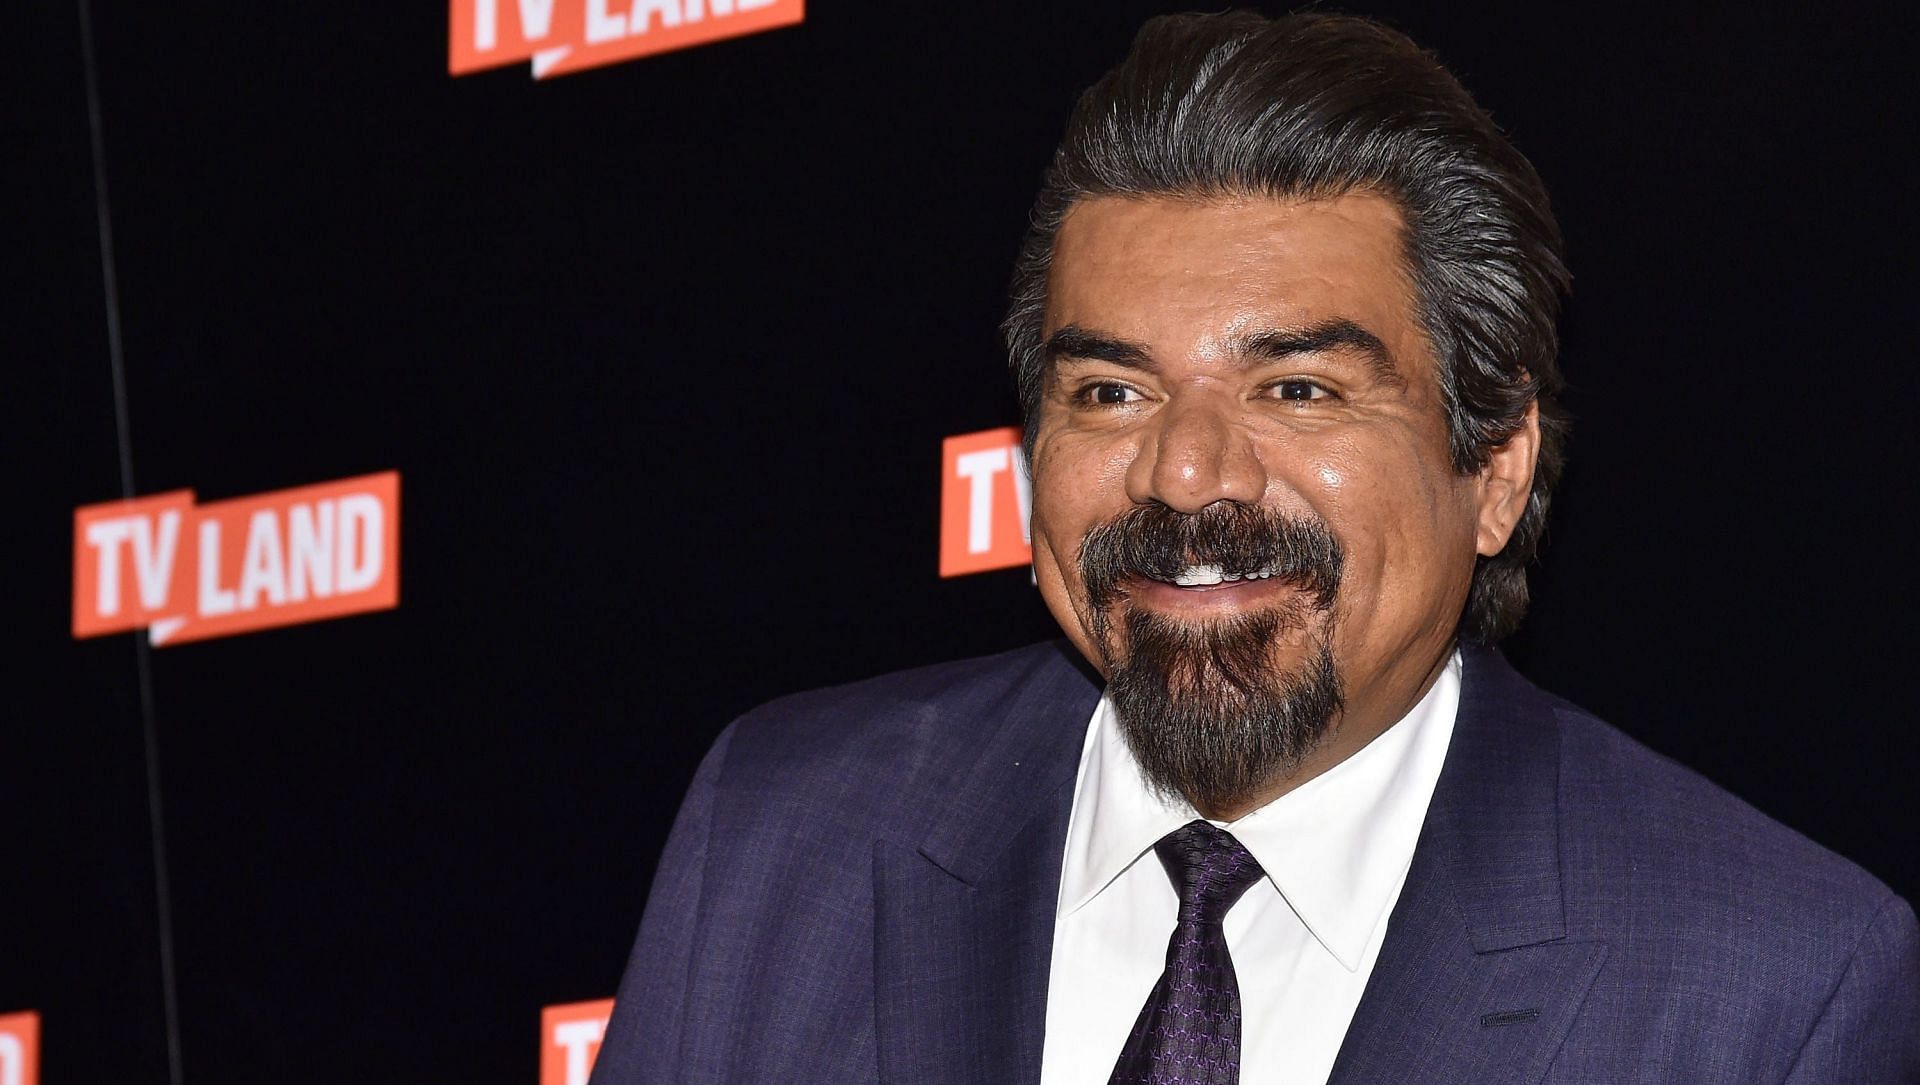 George Lopez started sweating and asked for water mid-way his set on December 31 (Image via Getty Images/ Mike Coppola)